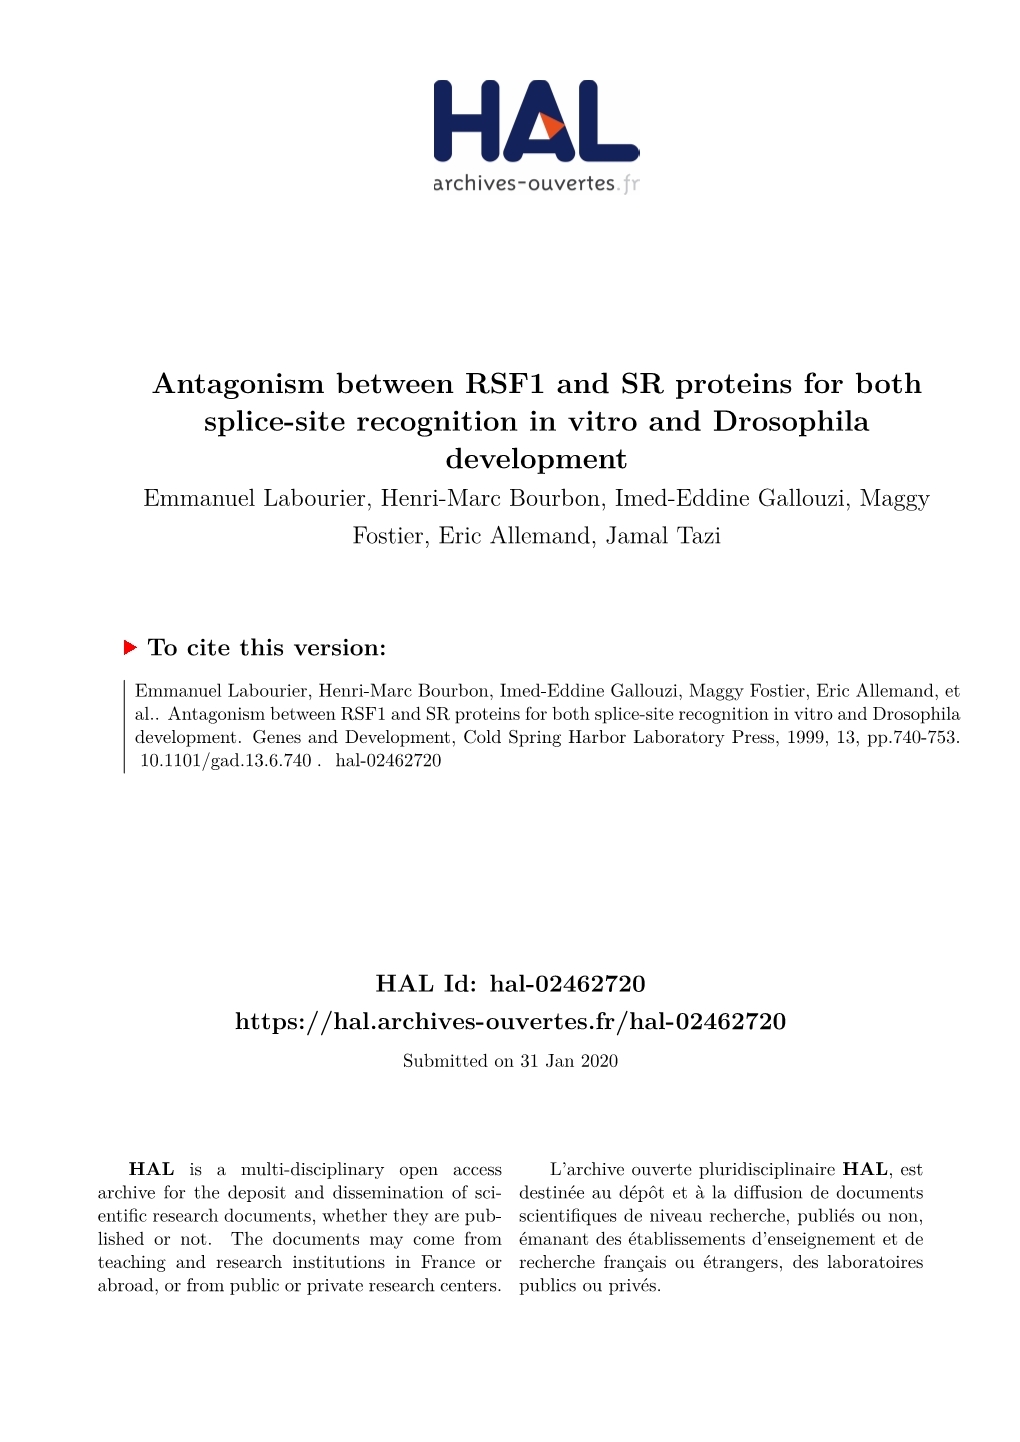 Antagonism Between RSF1 and SR Proteins For